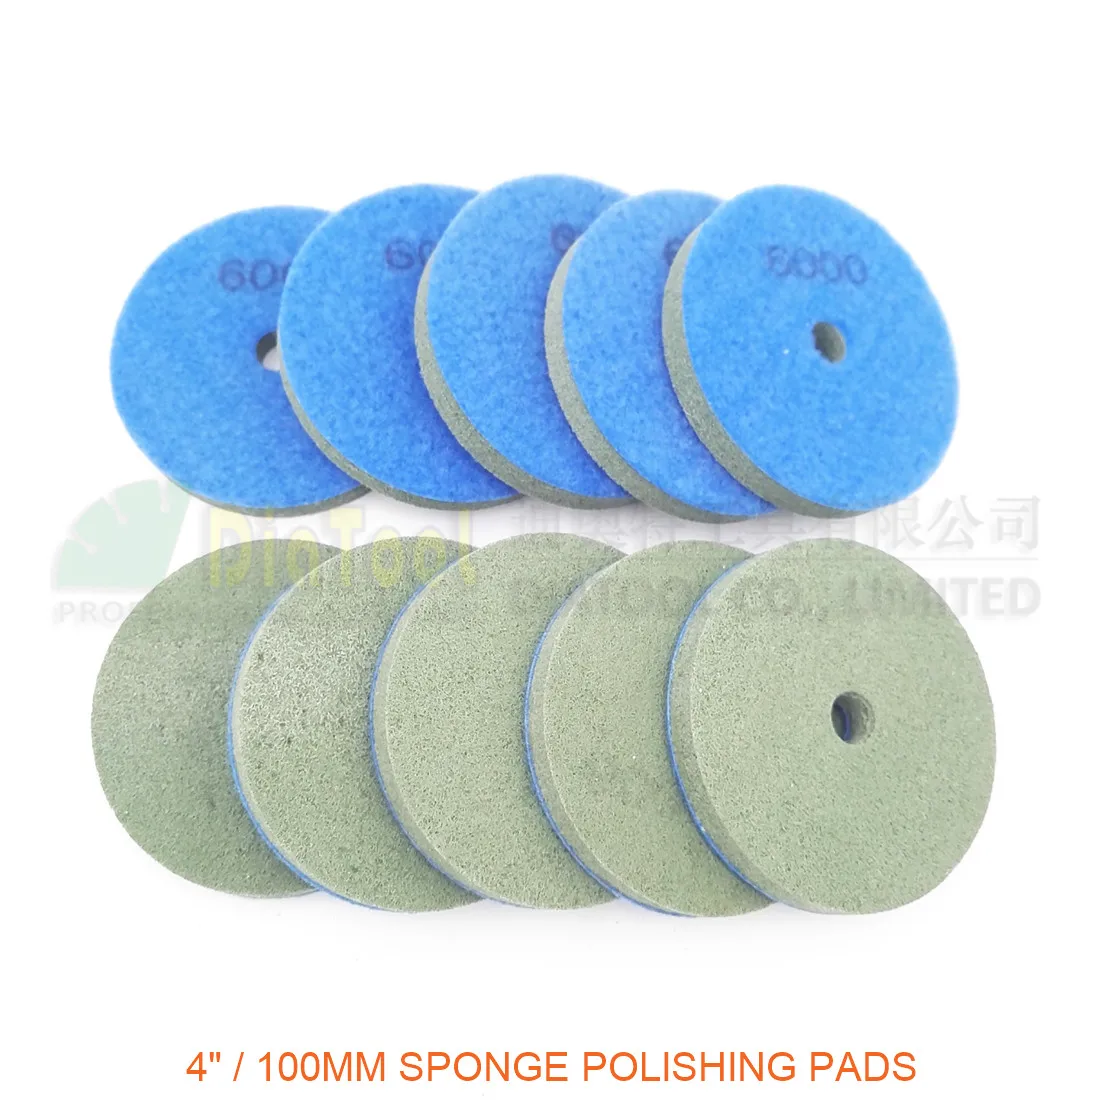 DIATOOL DIATOOL 10pcs/pk 100MM Sponge Diamond Polishing Pads For Soft Stone Marble Artificial Stone Terrazzo Grit#6000 Dia 100MM dt diatool diamond drill core bits drilling bits sets 5 8 11 connection hole saw cutter mixed size plus finger bits for marble